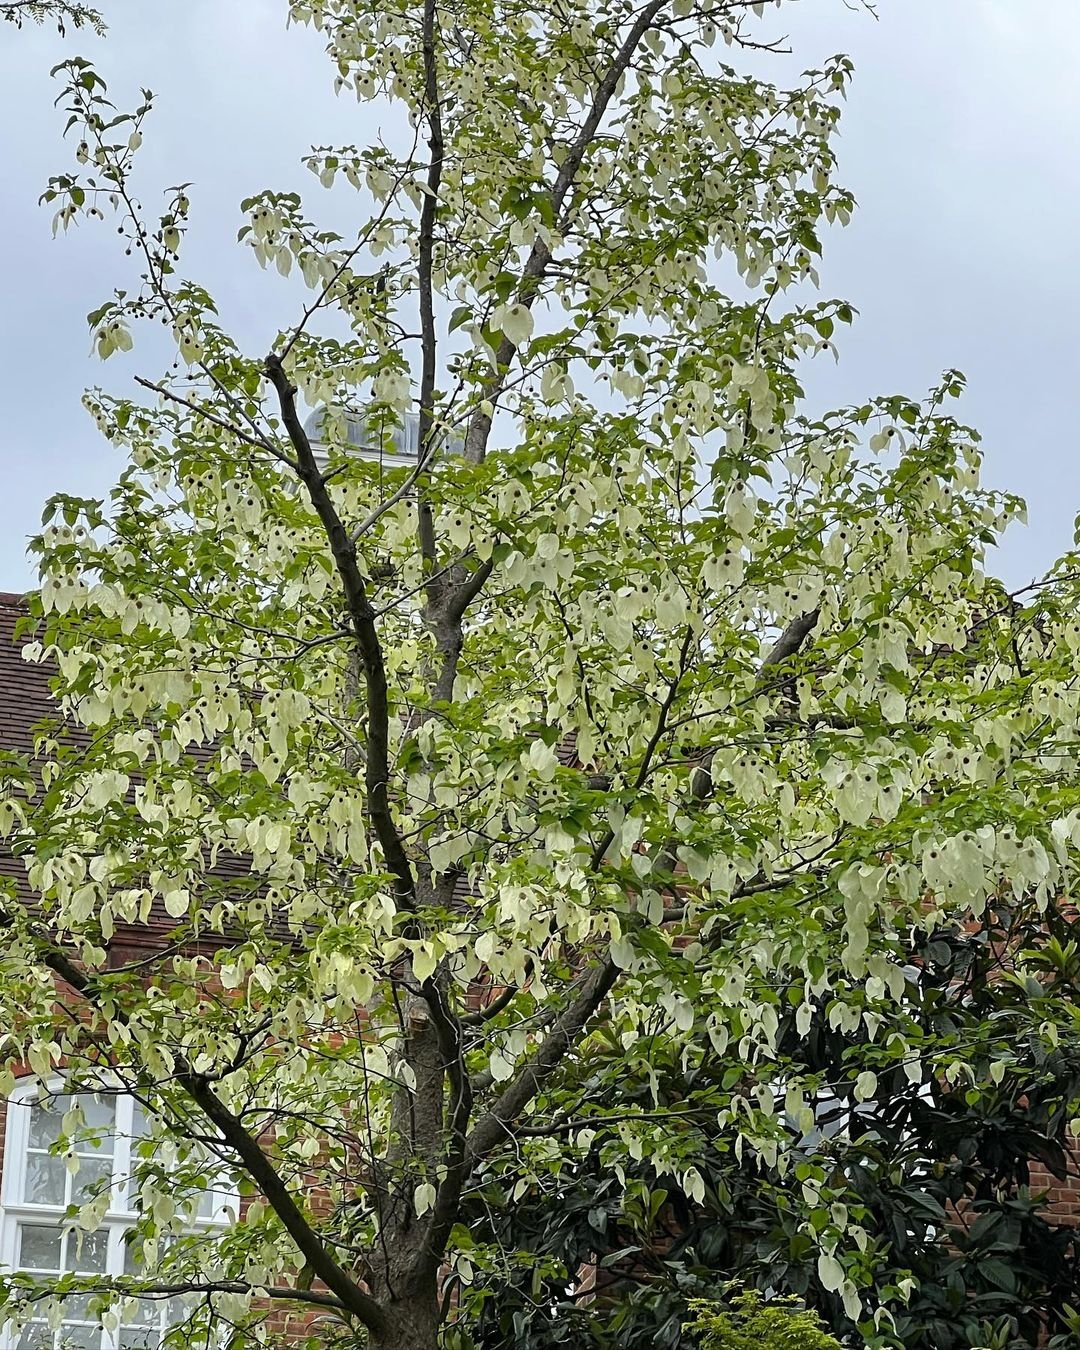 A tree with white flowers in front of a brick building. The tree has Dove Tree shape leaves.